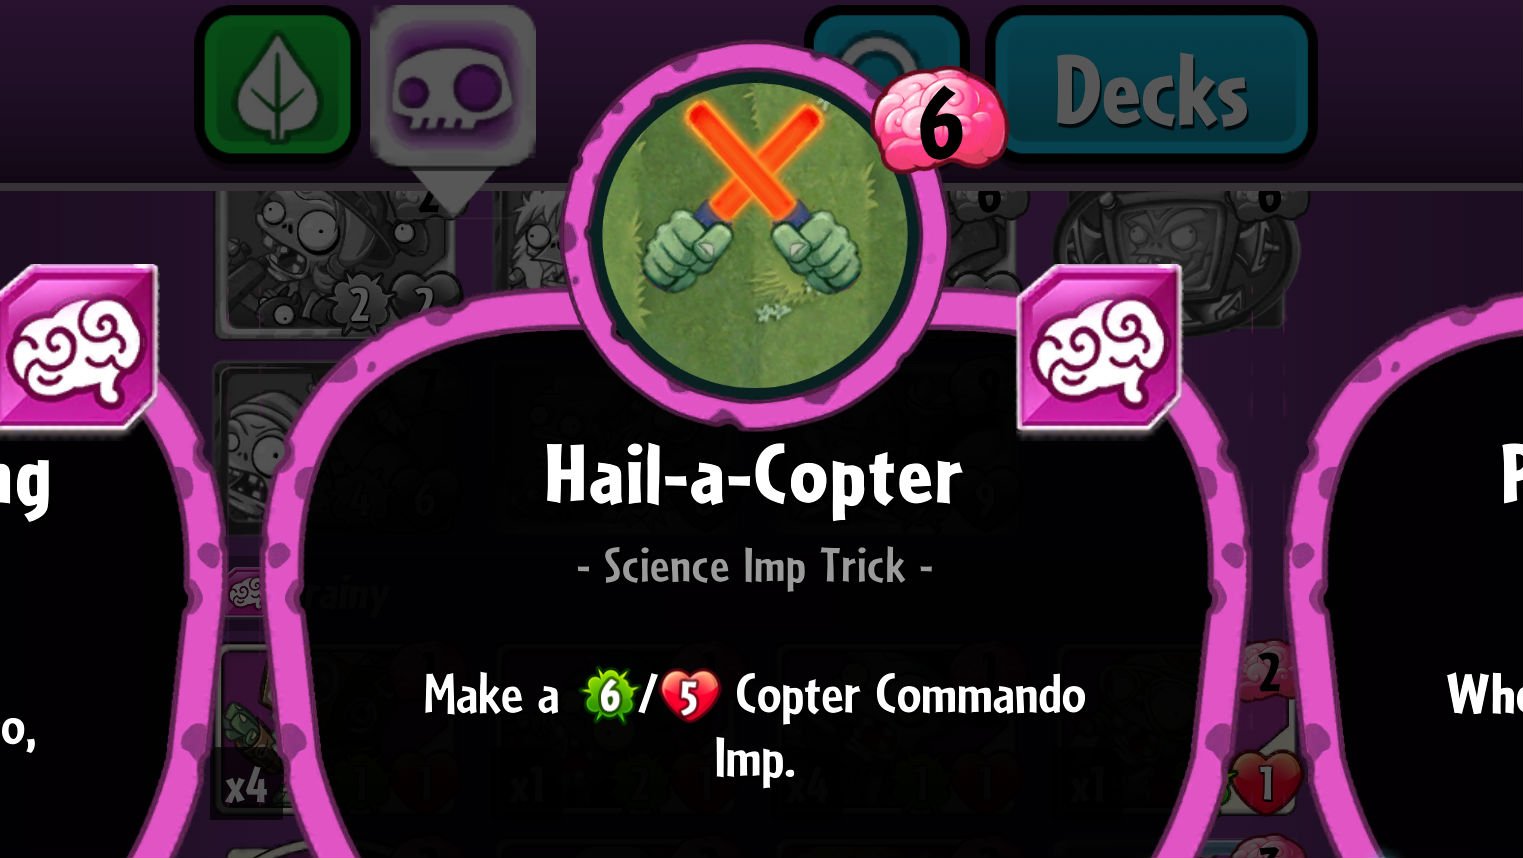 Plants vs. Zombies Heroes Hail-a-Copter